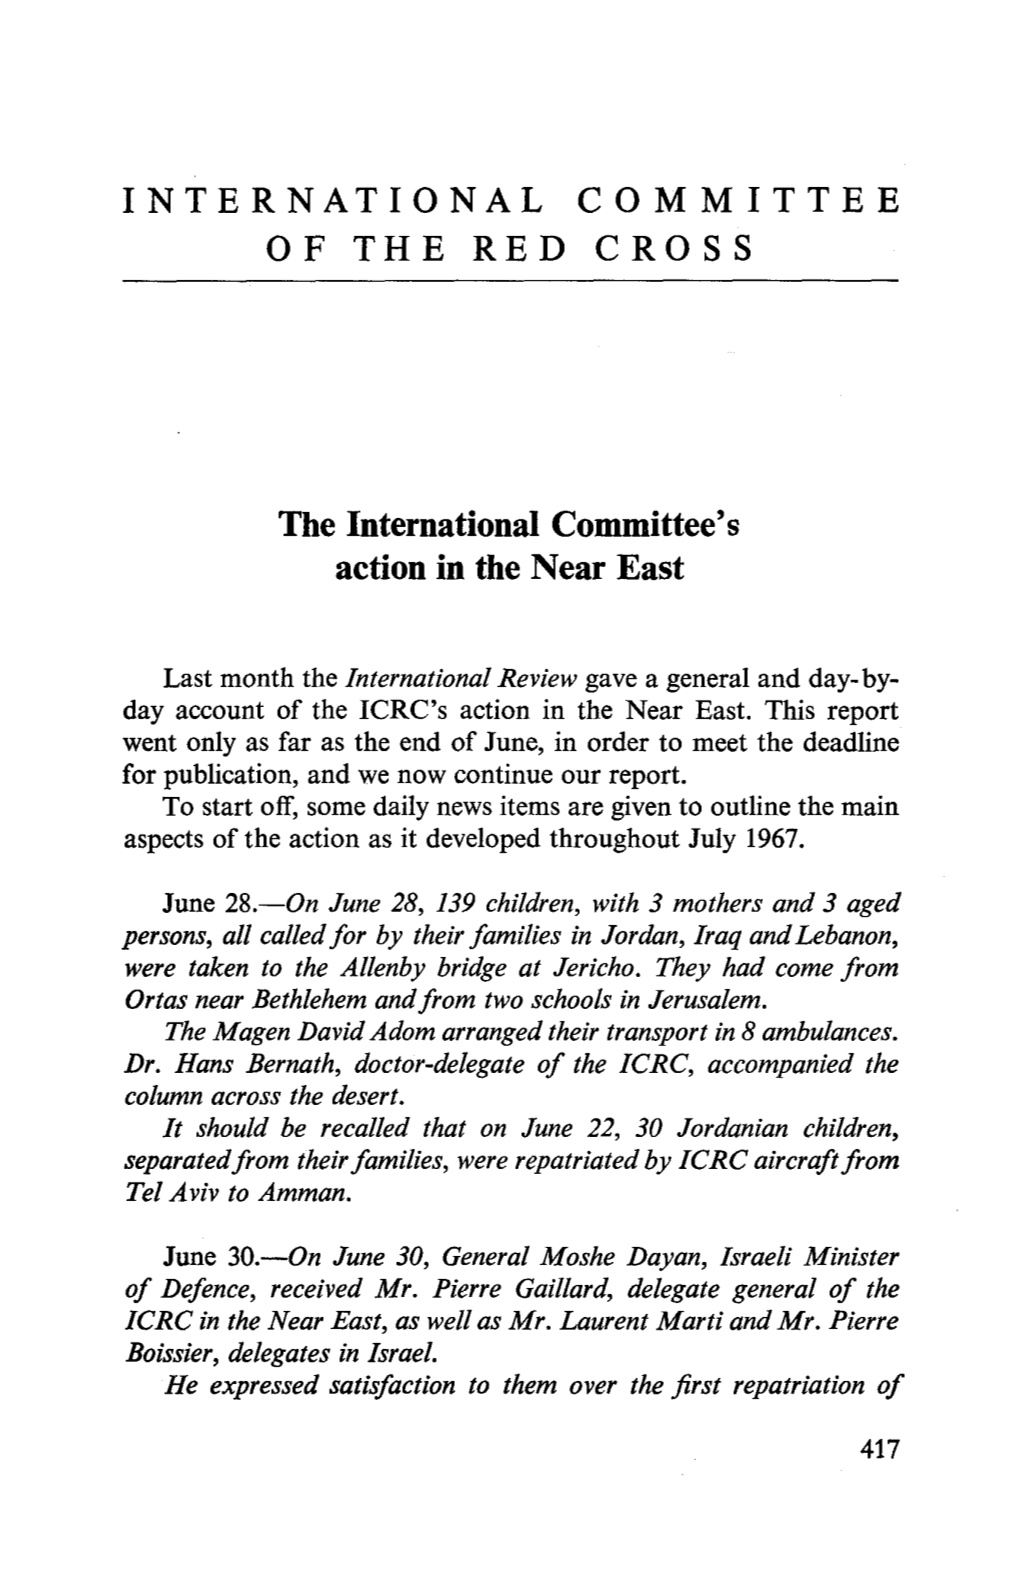 The International Committee's Action in the Near East